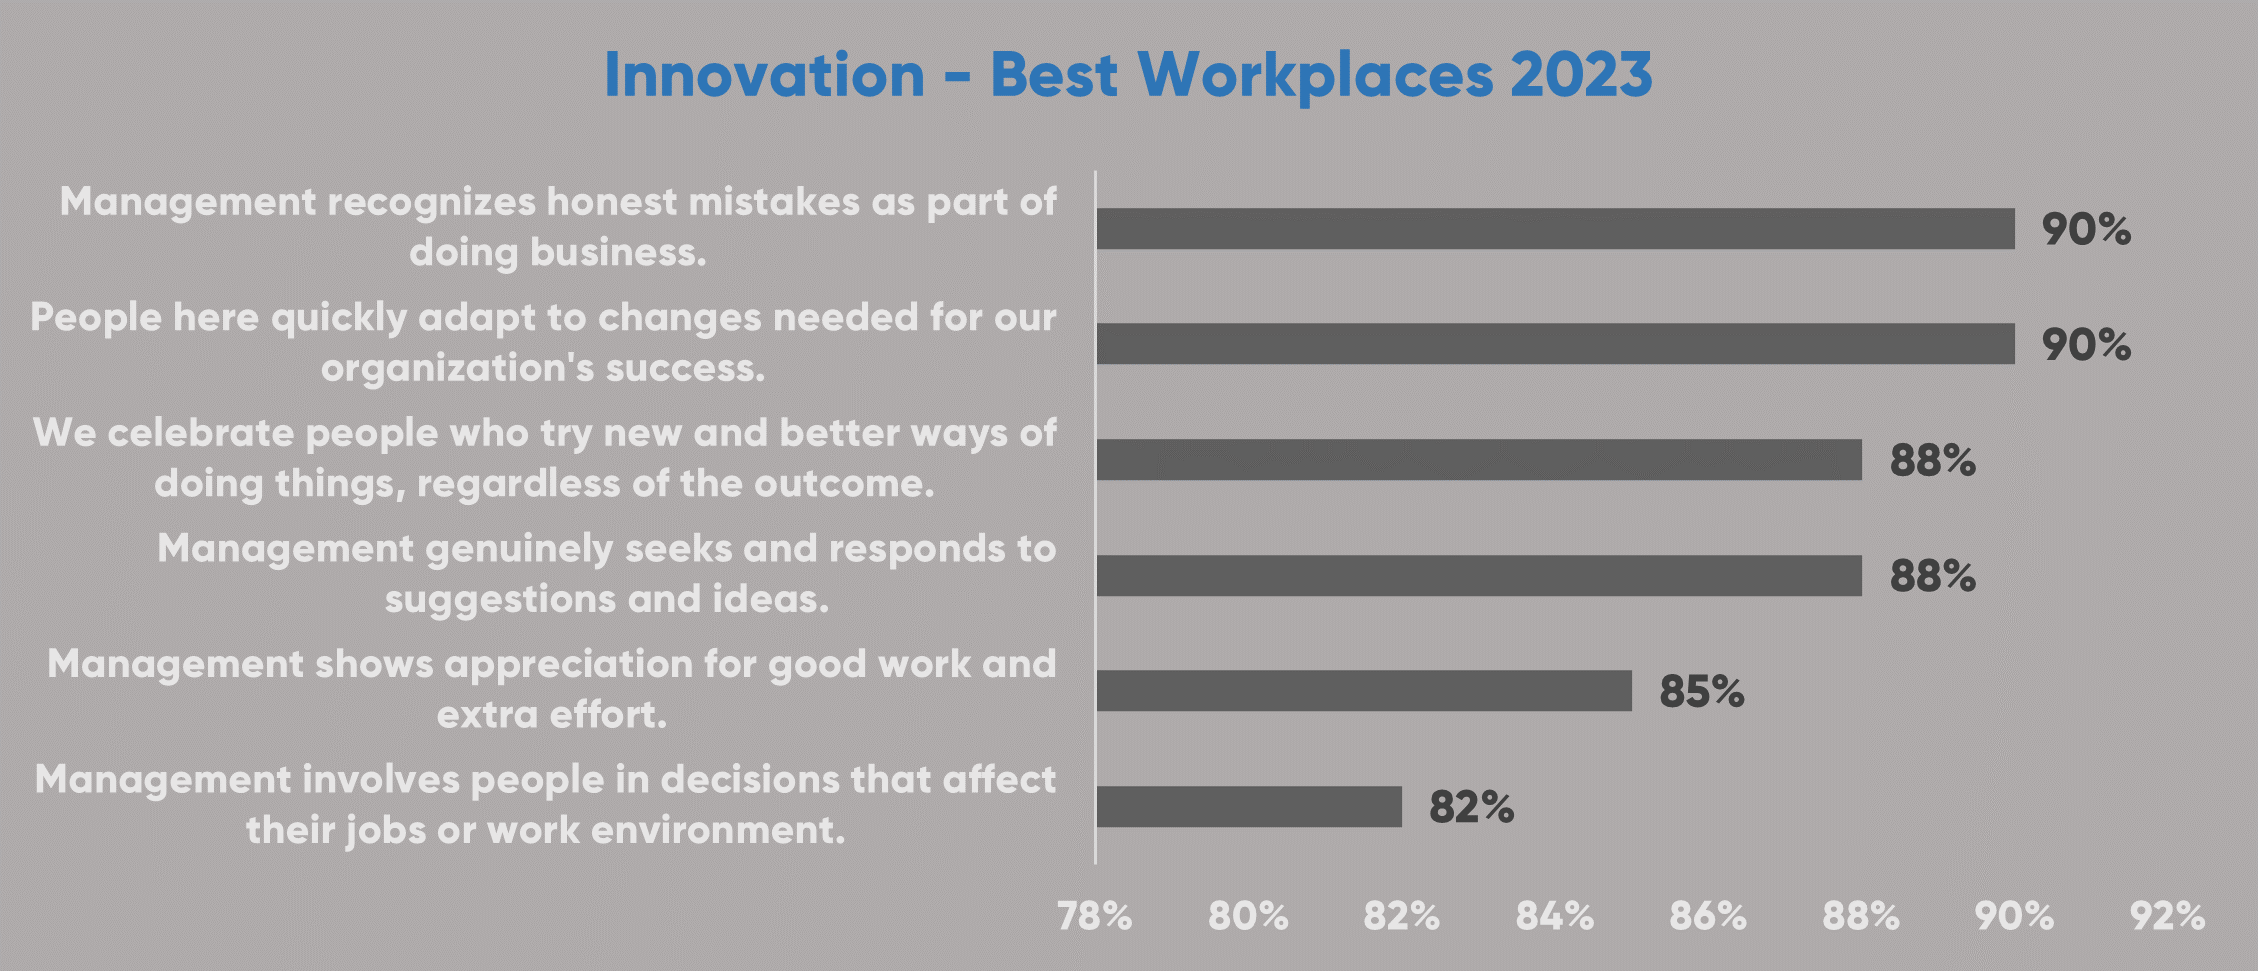 Innovation Best Workplaces 2023